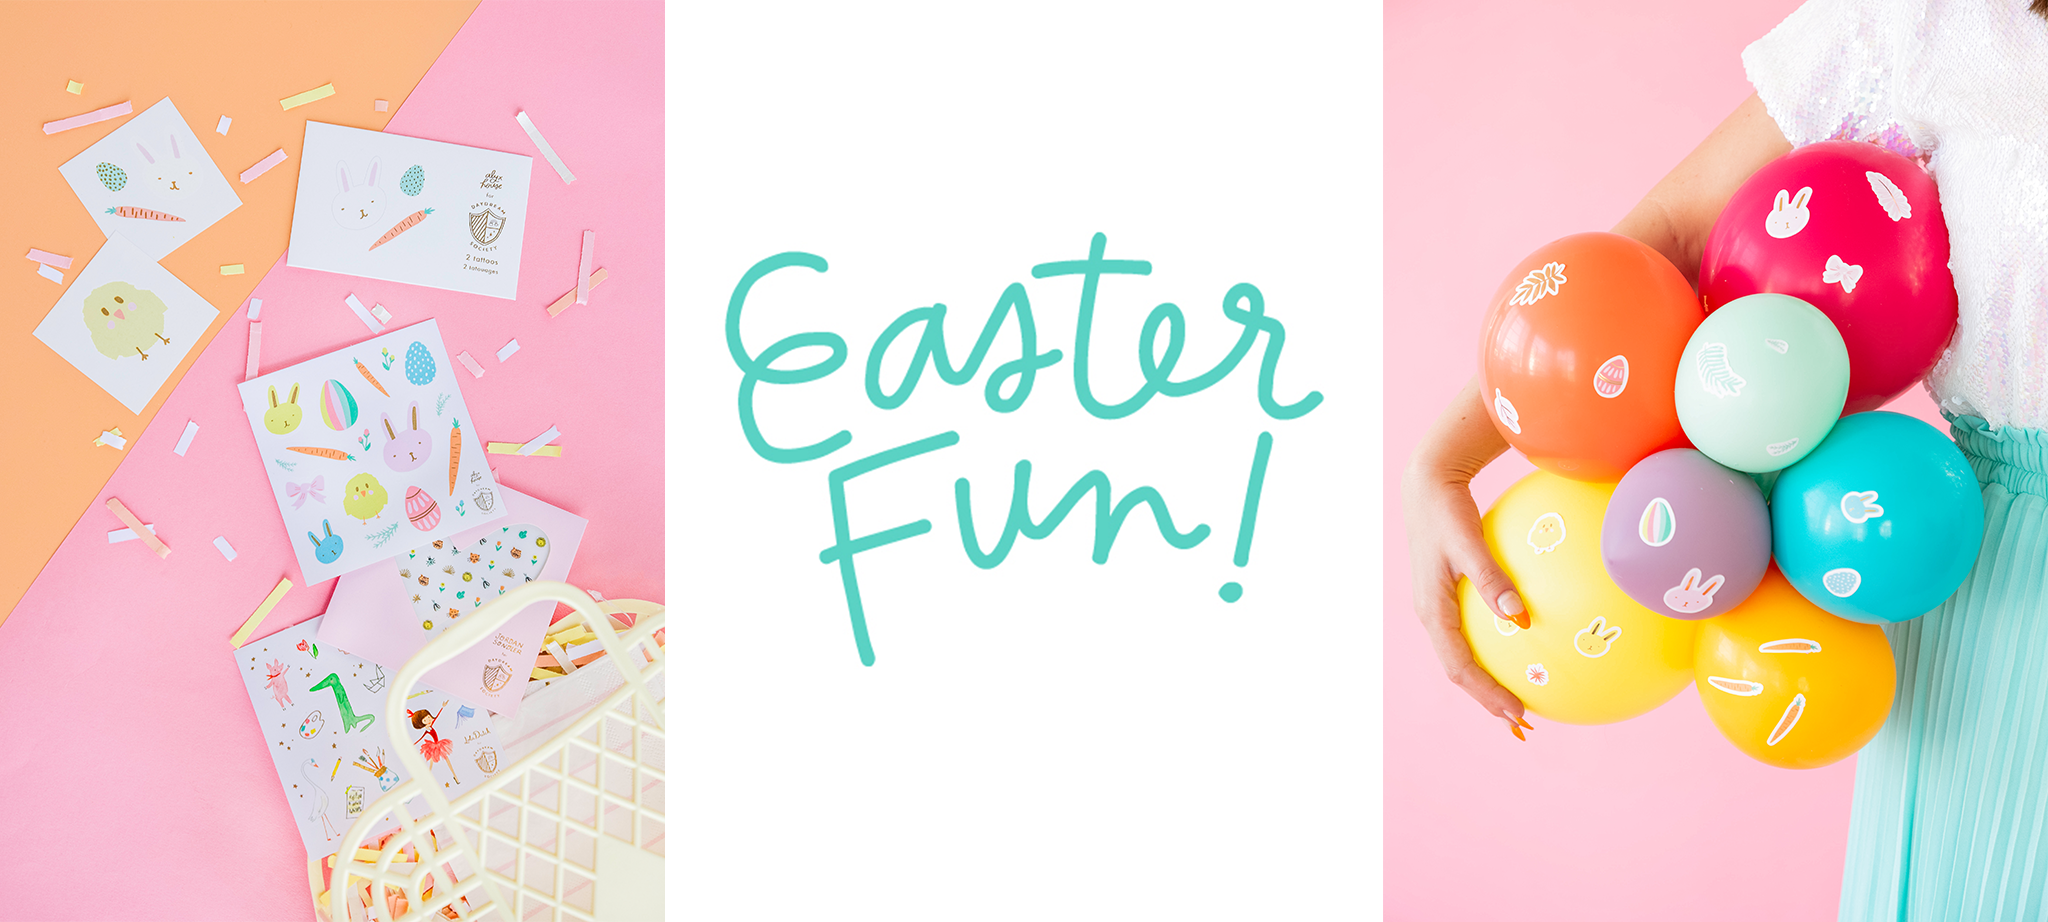 Easter Fun Collection